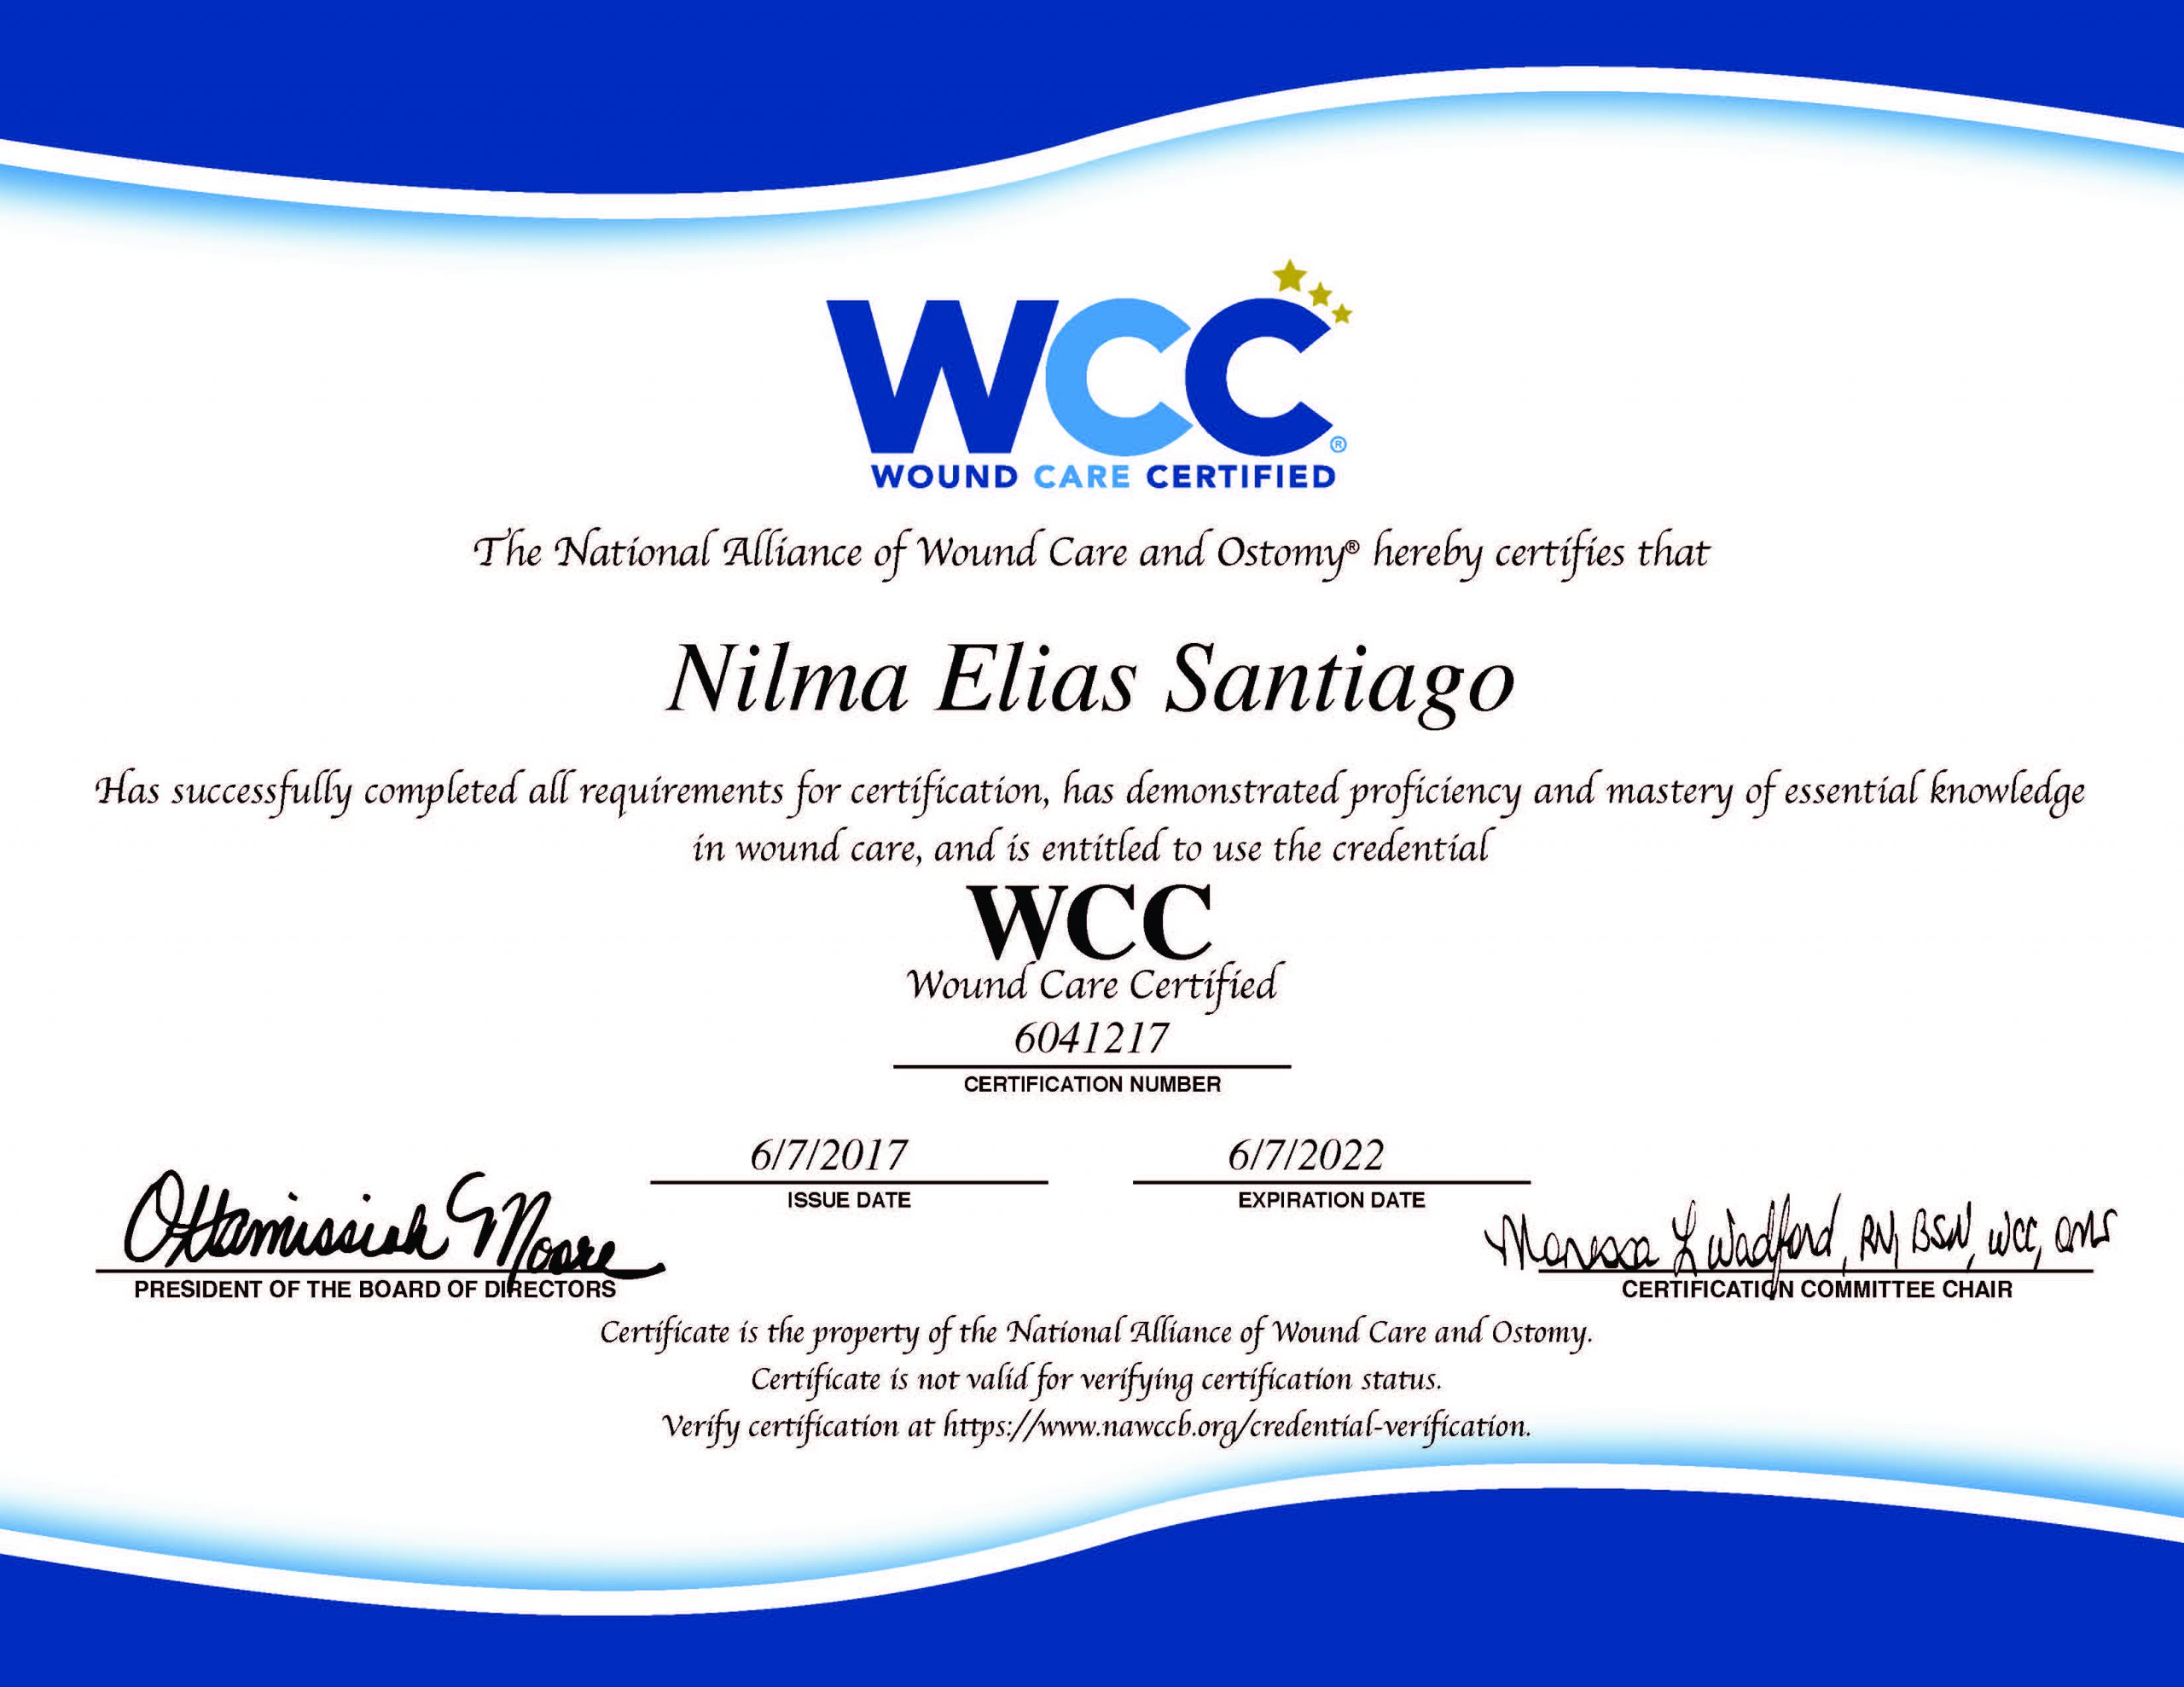 Wound Care Certified – Certification